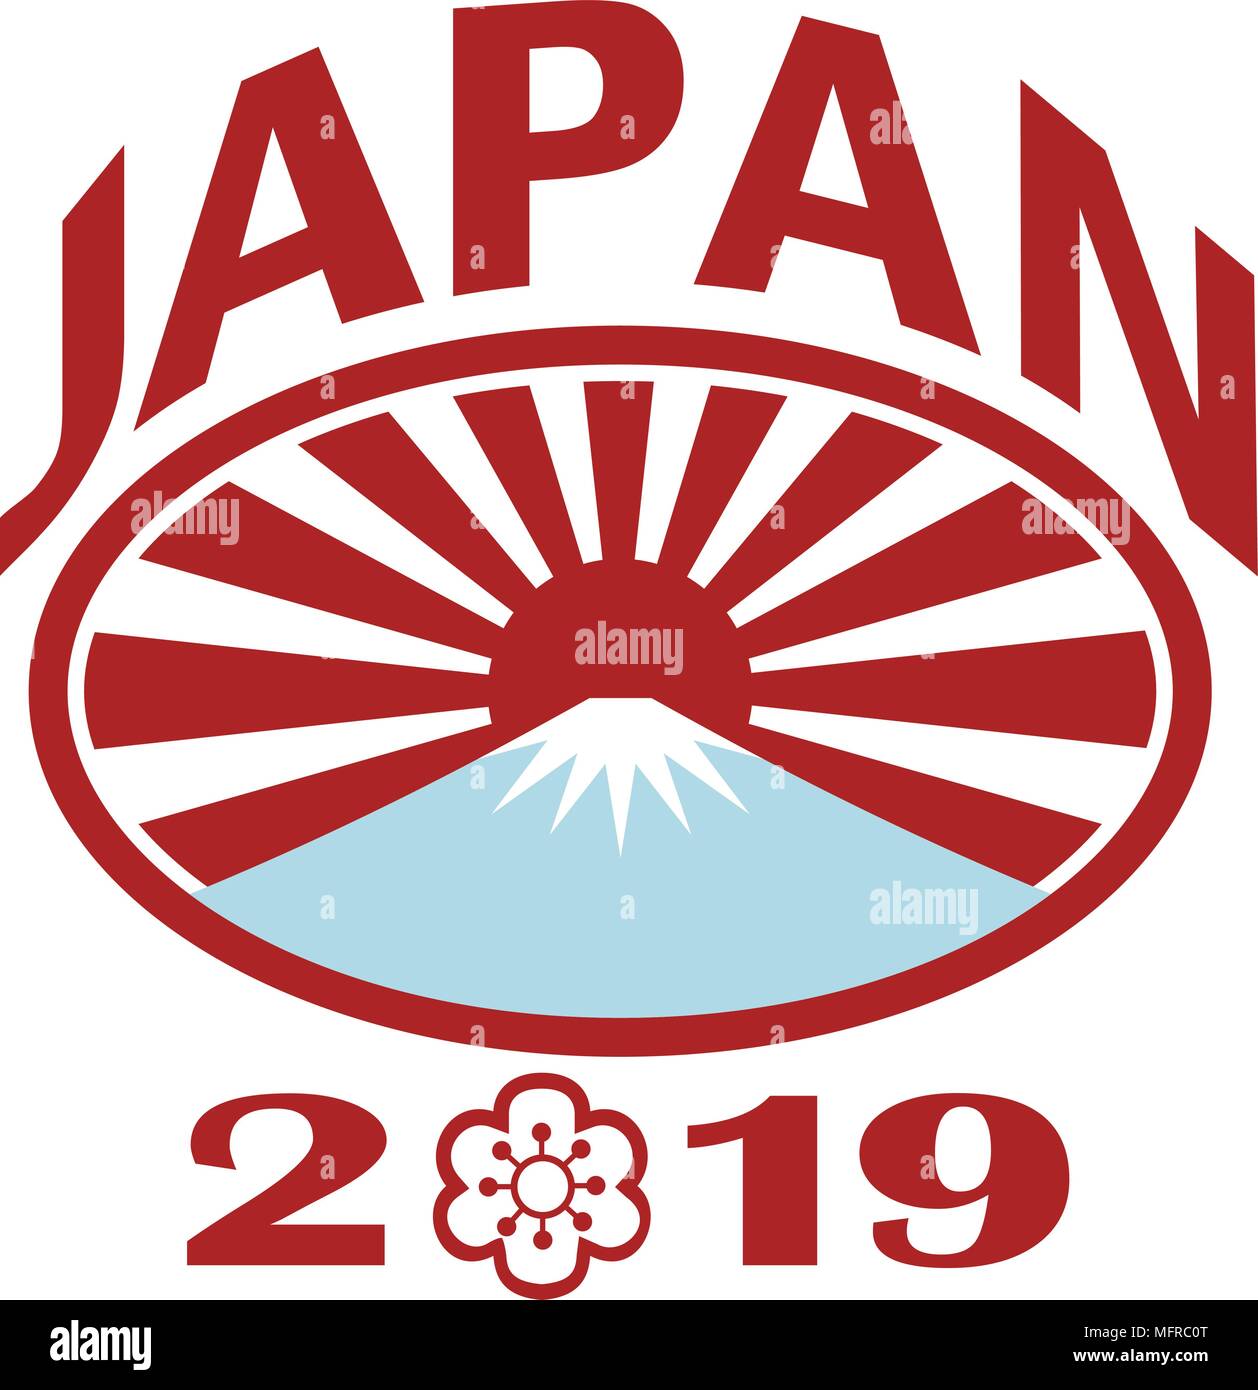 Retro style illustration of a rugby ball with Japanese rising sun and Mount Fuji mountain inside oval with words Japan 2019 and sakura or cherry bloss Stock Vector